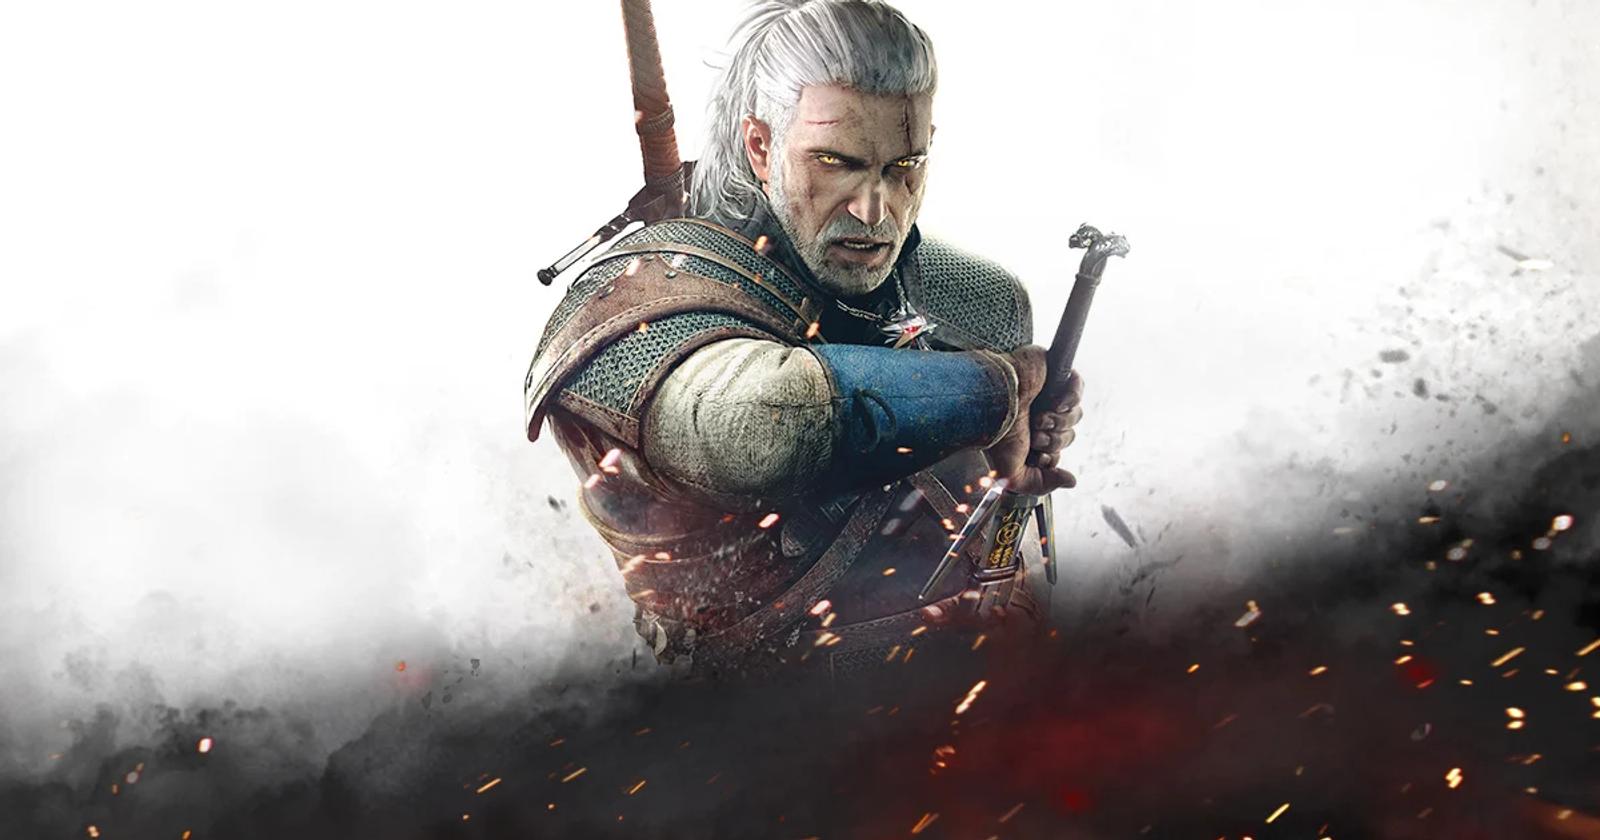 The Witcher 3's PS5/Xbox Series X Release Has Been Delayed